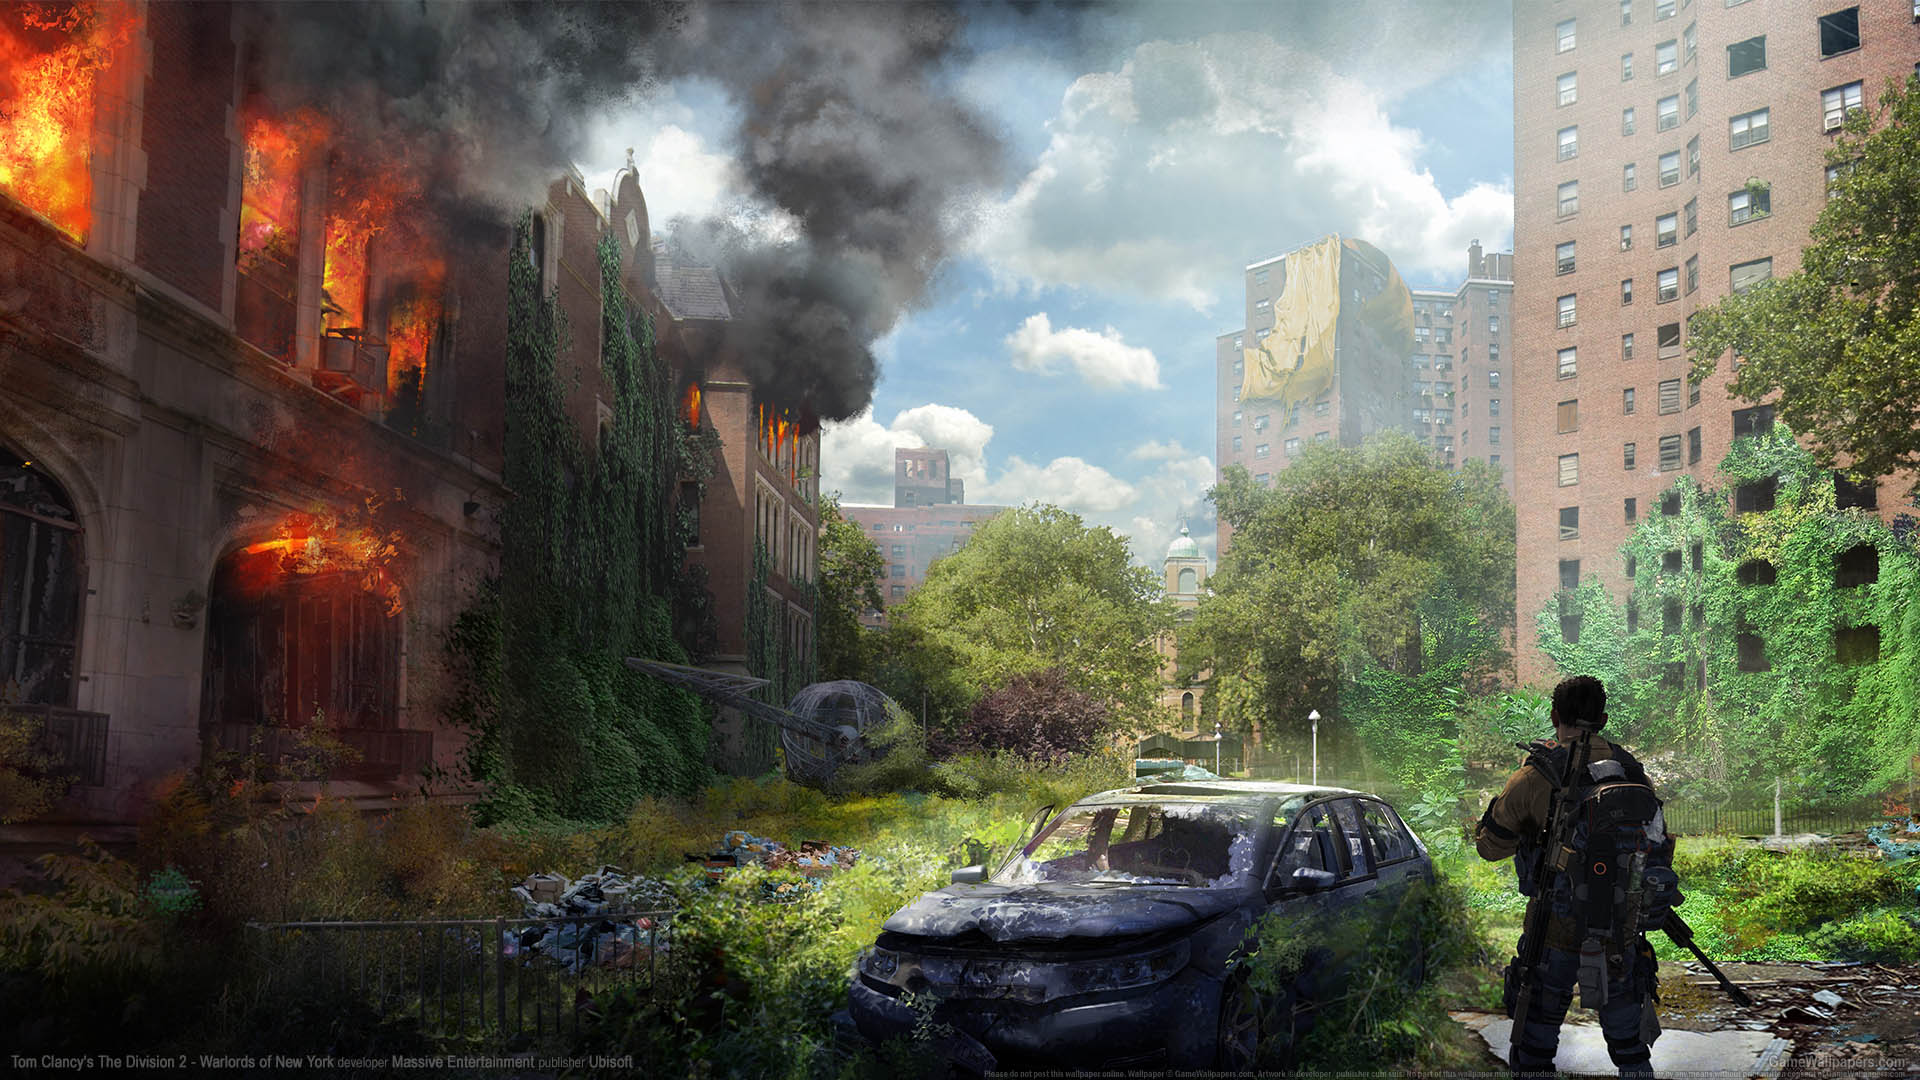 Tom Clancy's The Division 2 - Warlords of New York wallpaper 03 1920x1080